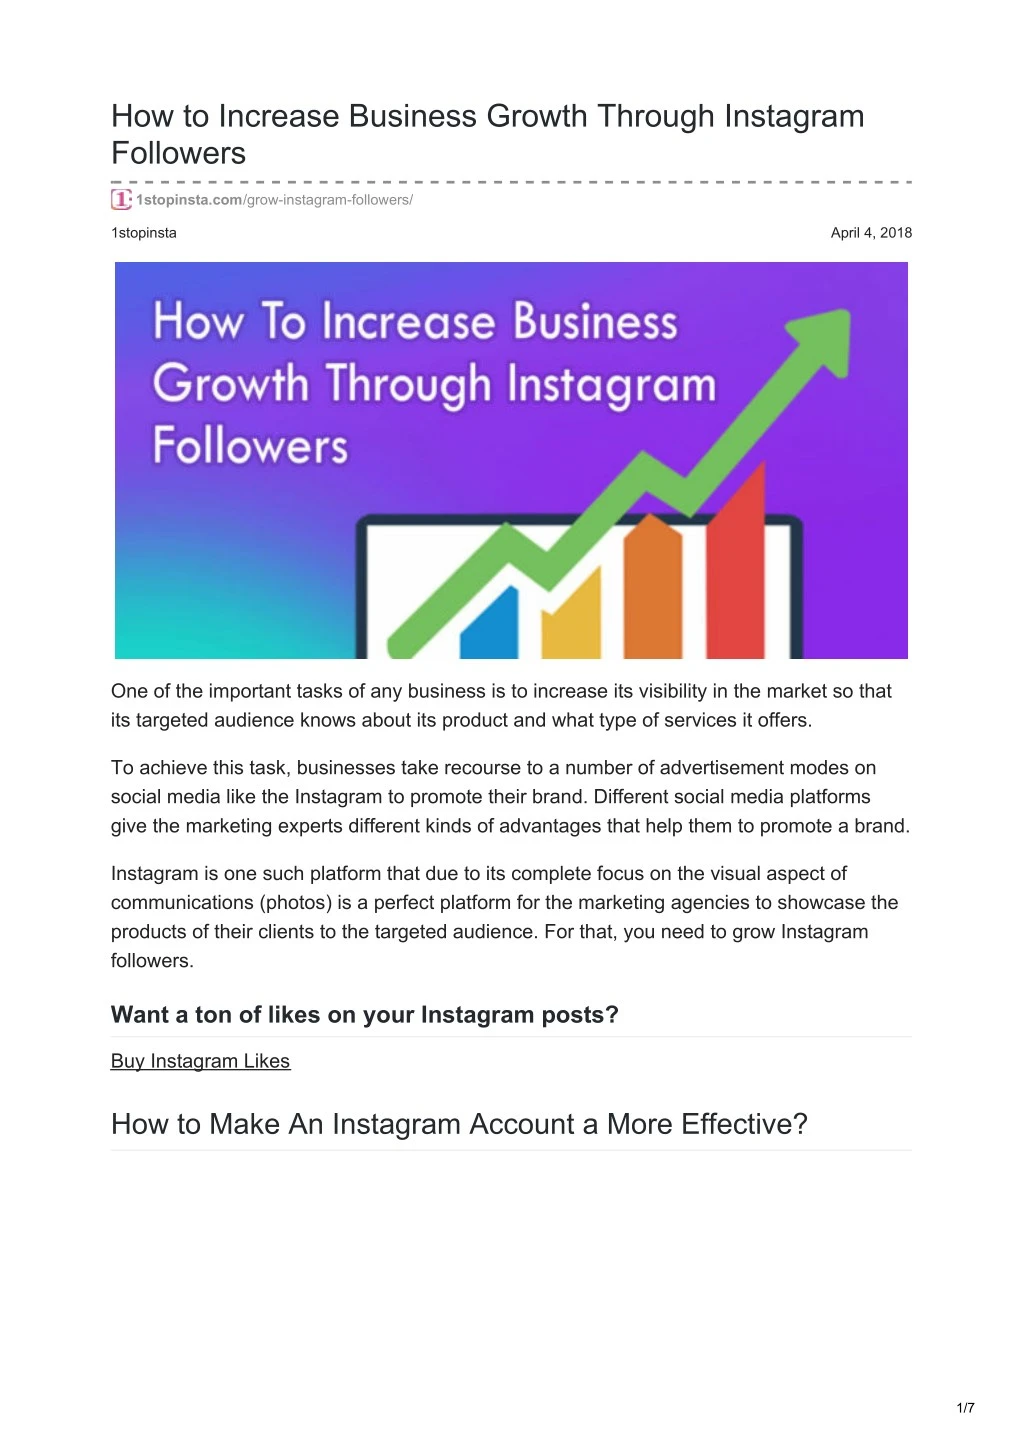 how to increase business growth through instagram followers - instagram follower platforms